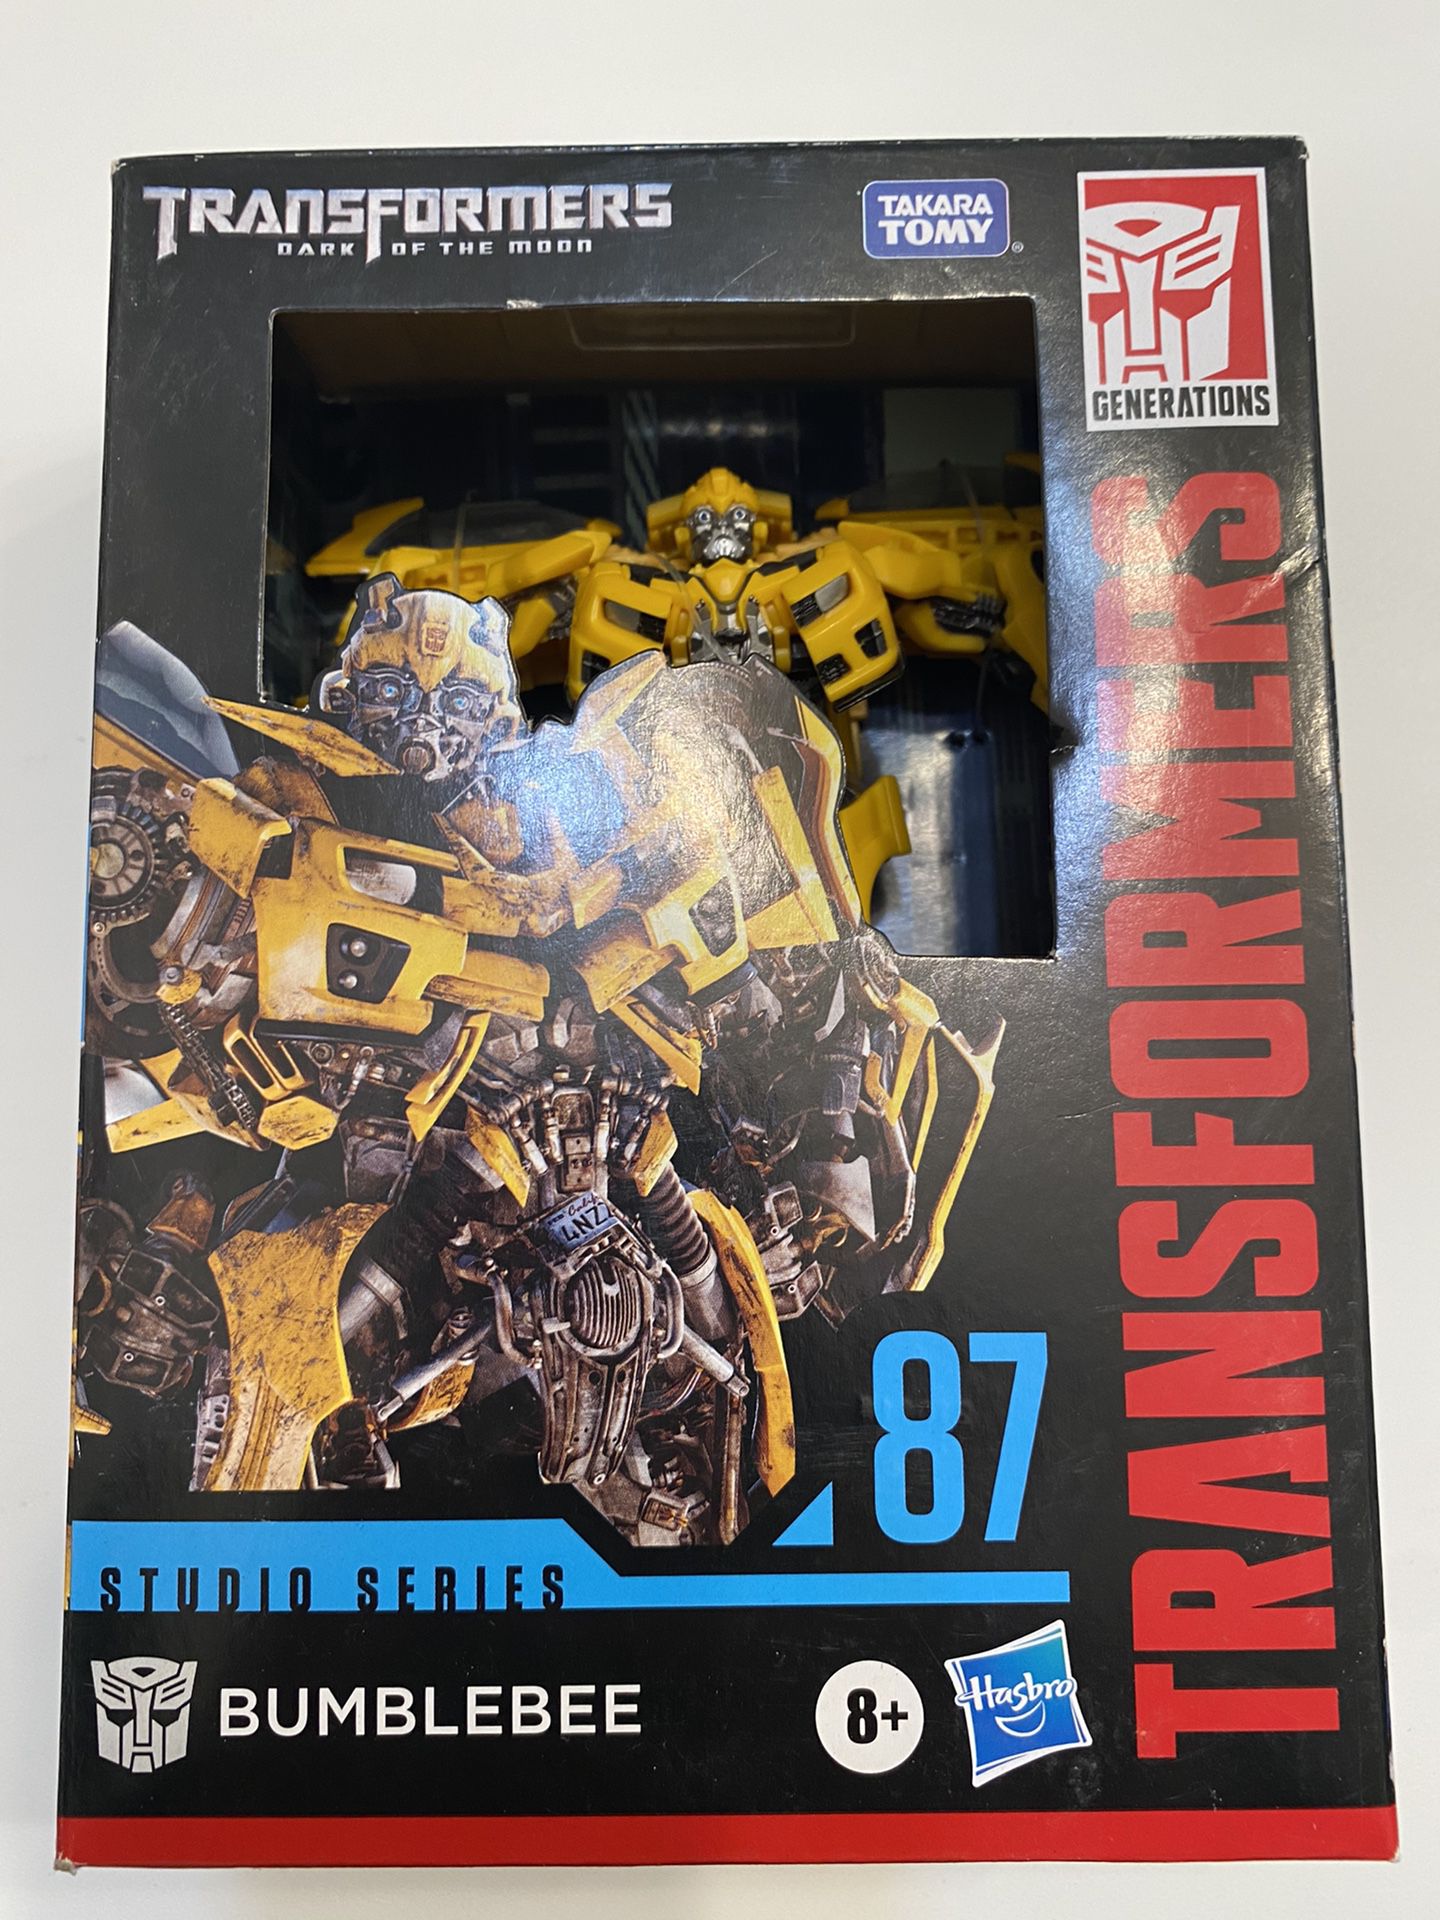 Transformers Toys Studio Series 87 Deluxe Class Dark of The Moon Bumblebee Action Figure - Ages 8 and Up, 4.5-inch, Multicolored